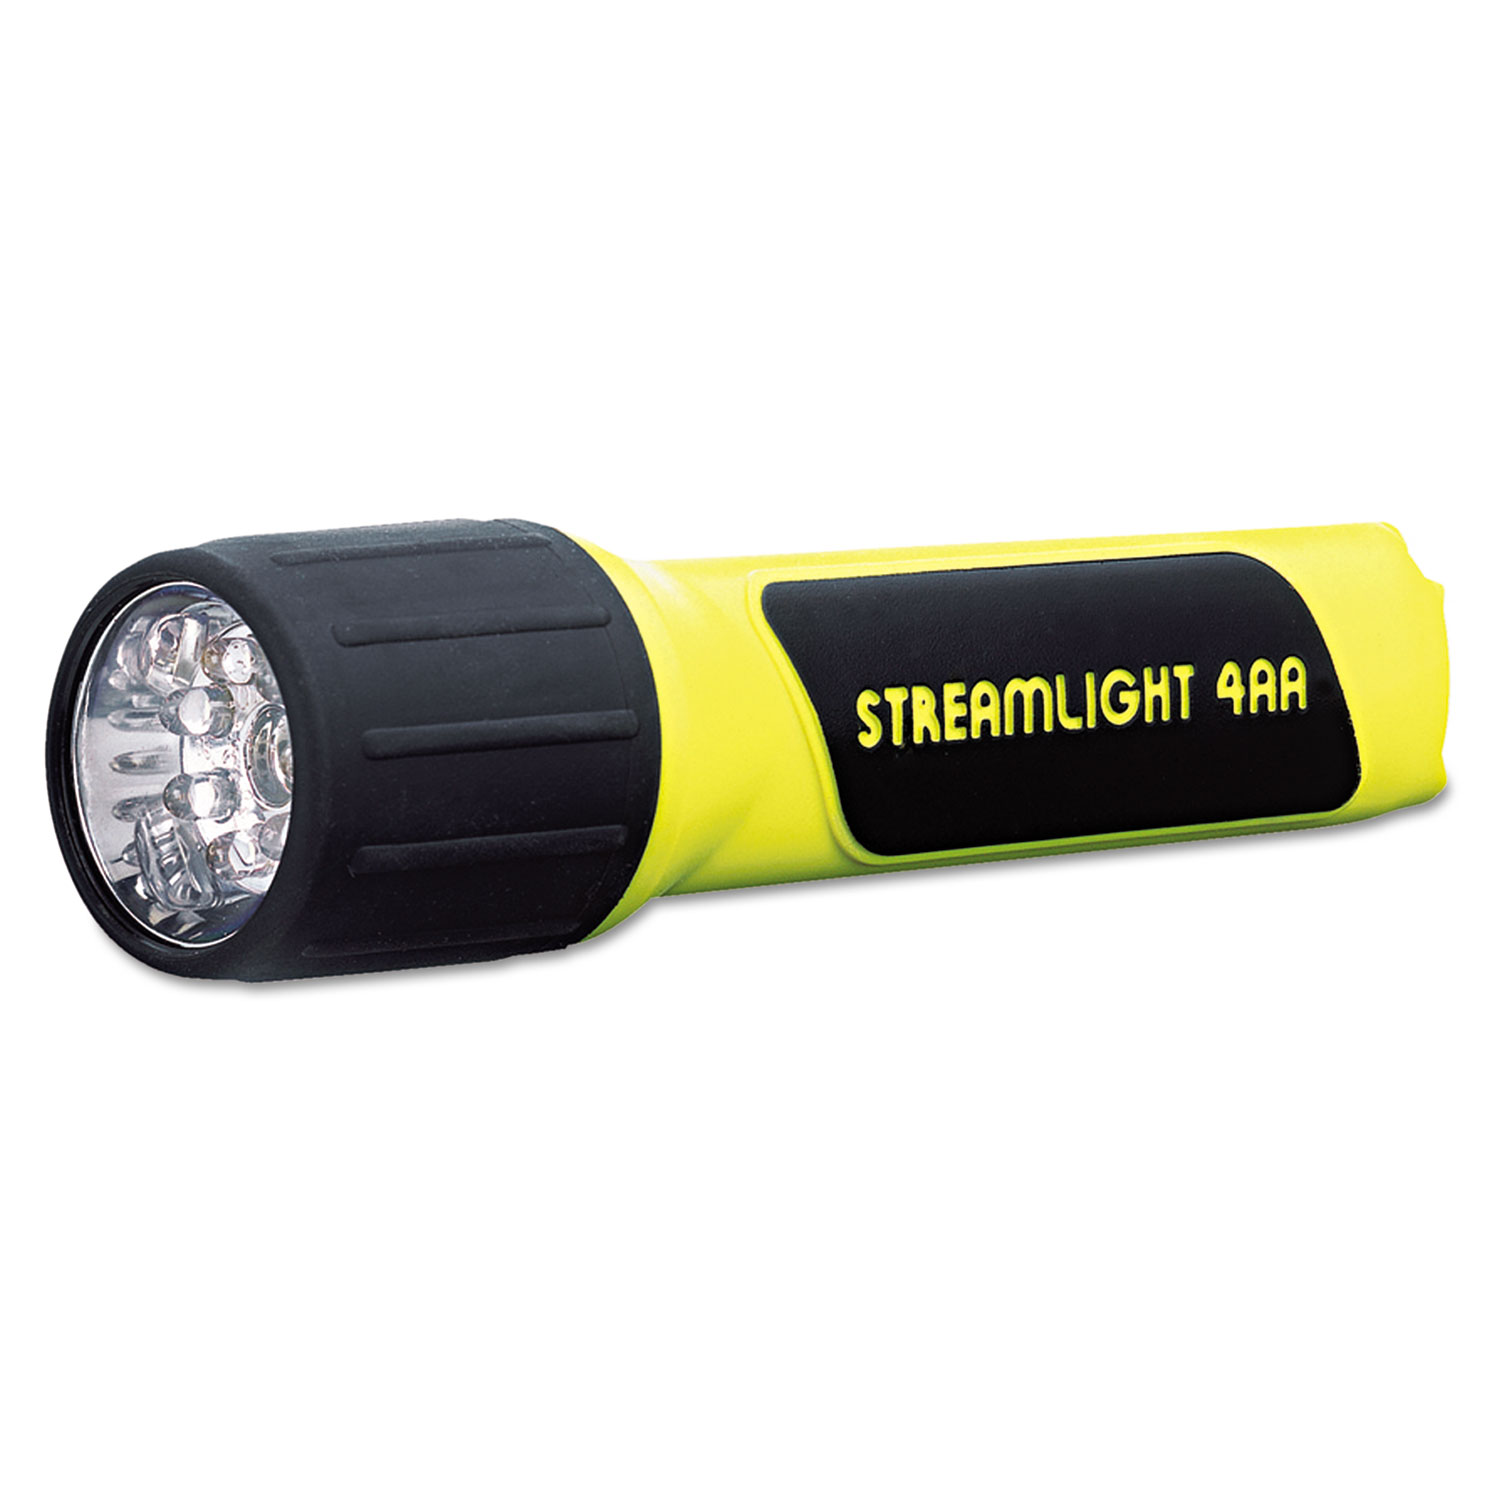  Streamlight 68202 ProPolymer LED Flashlight, 4 AA Batteries (Included), Yellow/Black (LGT68202) 